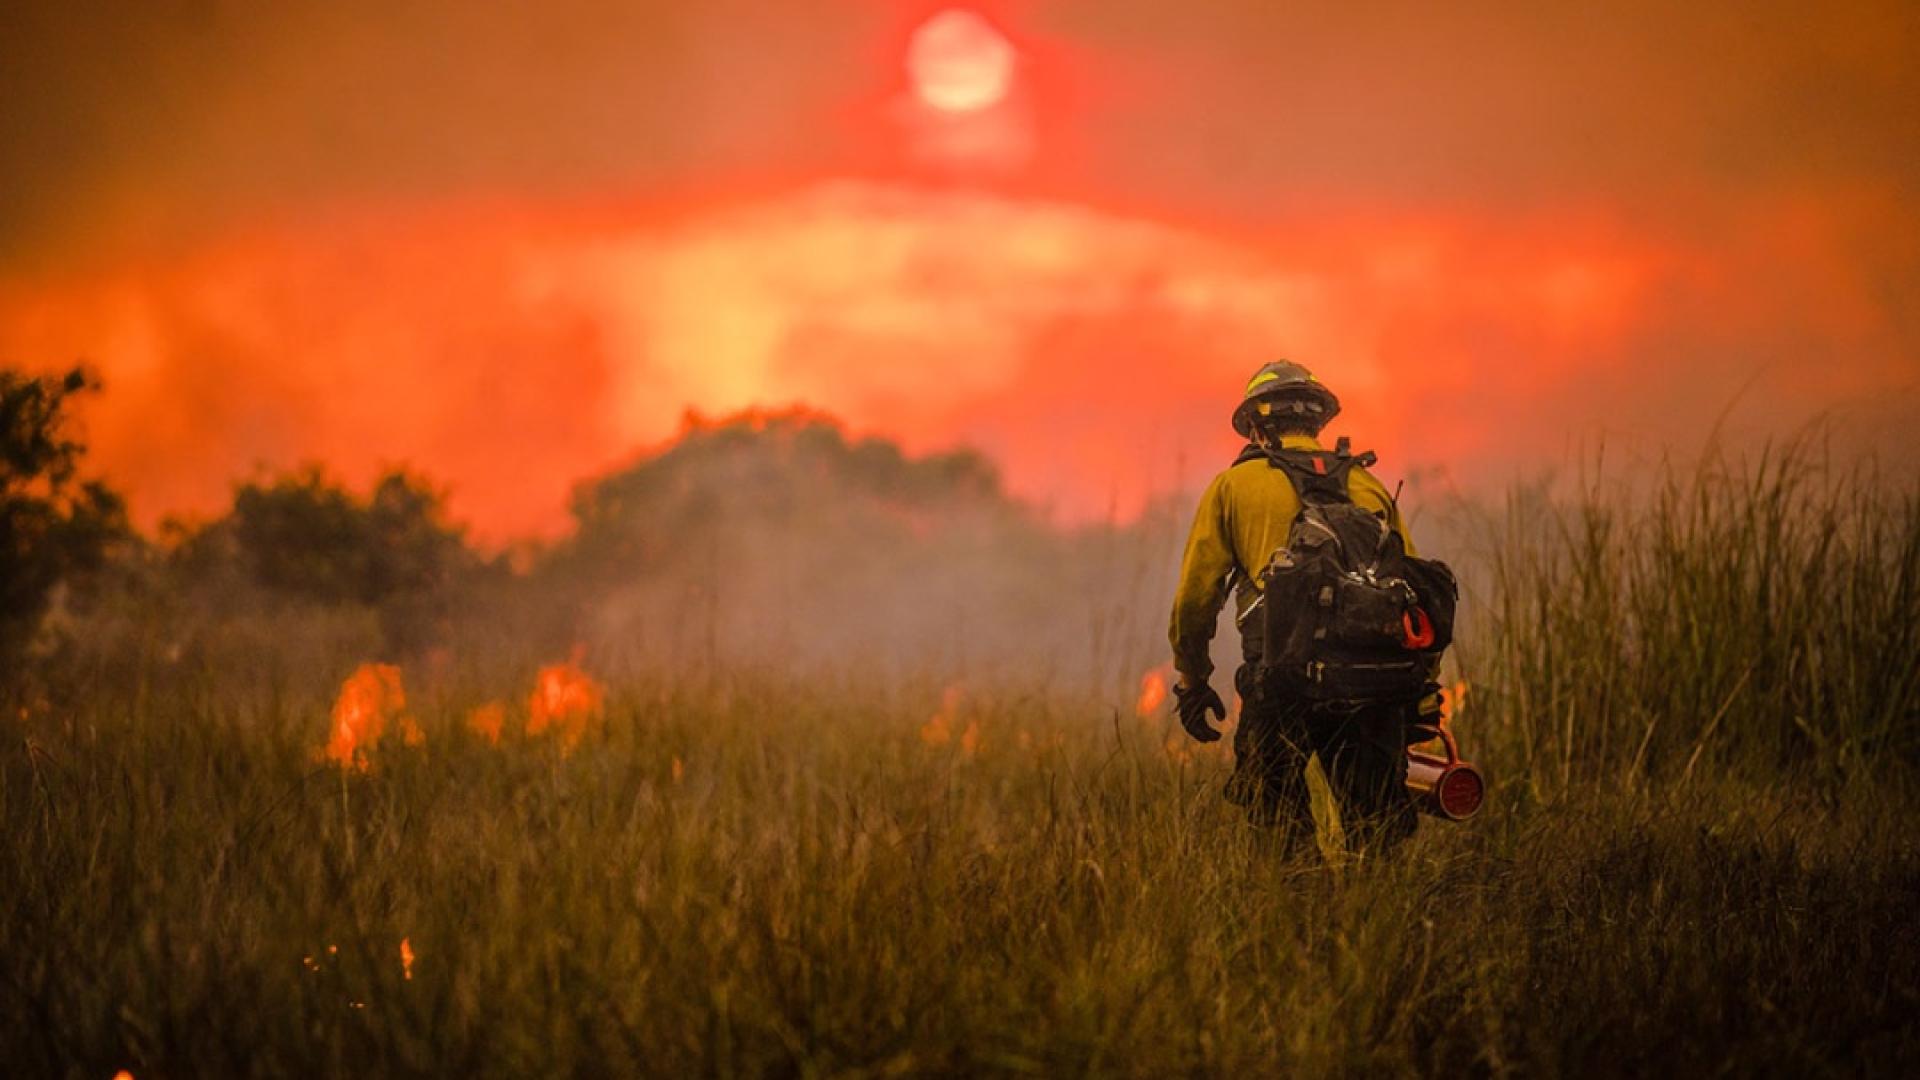 A firefighter works on a prescribed fire at sunset in southern Florida. Photo by NPS.